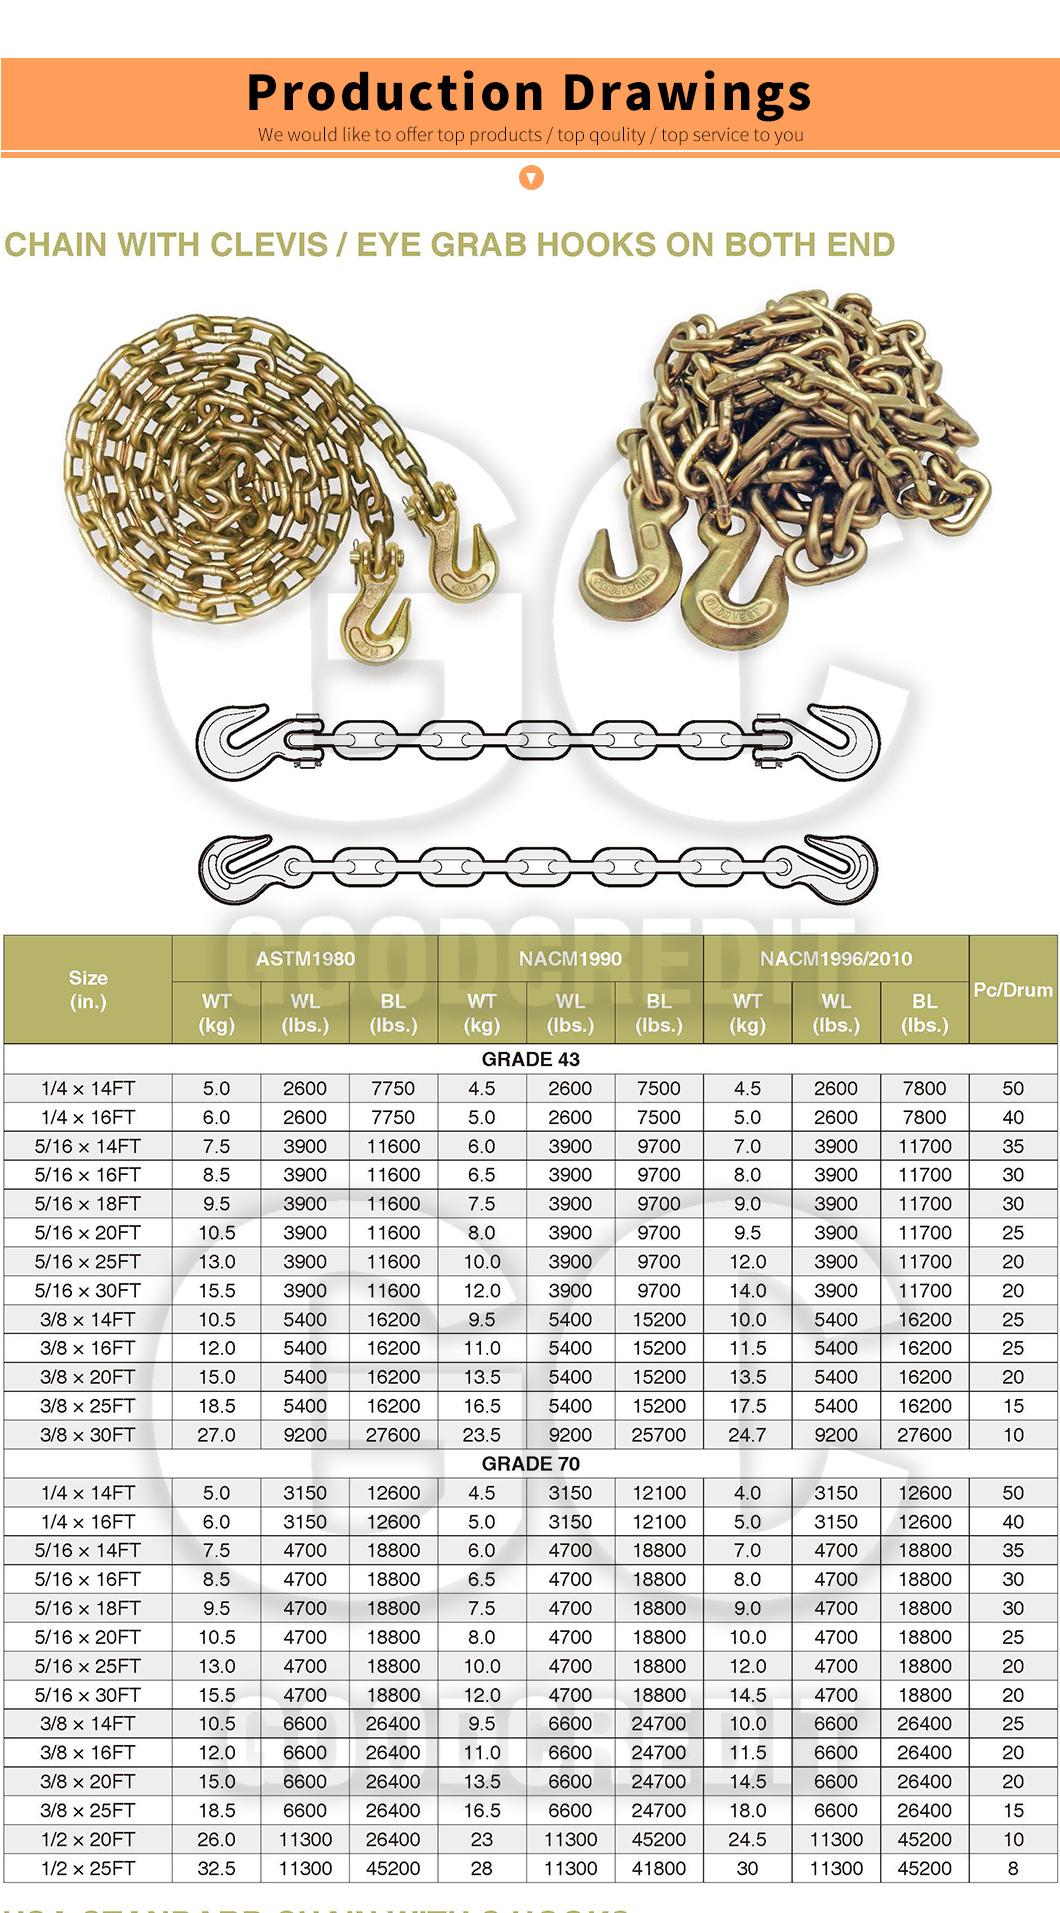 Steel Link Chain/Security Chain/G70 Binder Chain with Hook